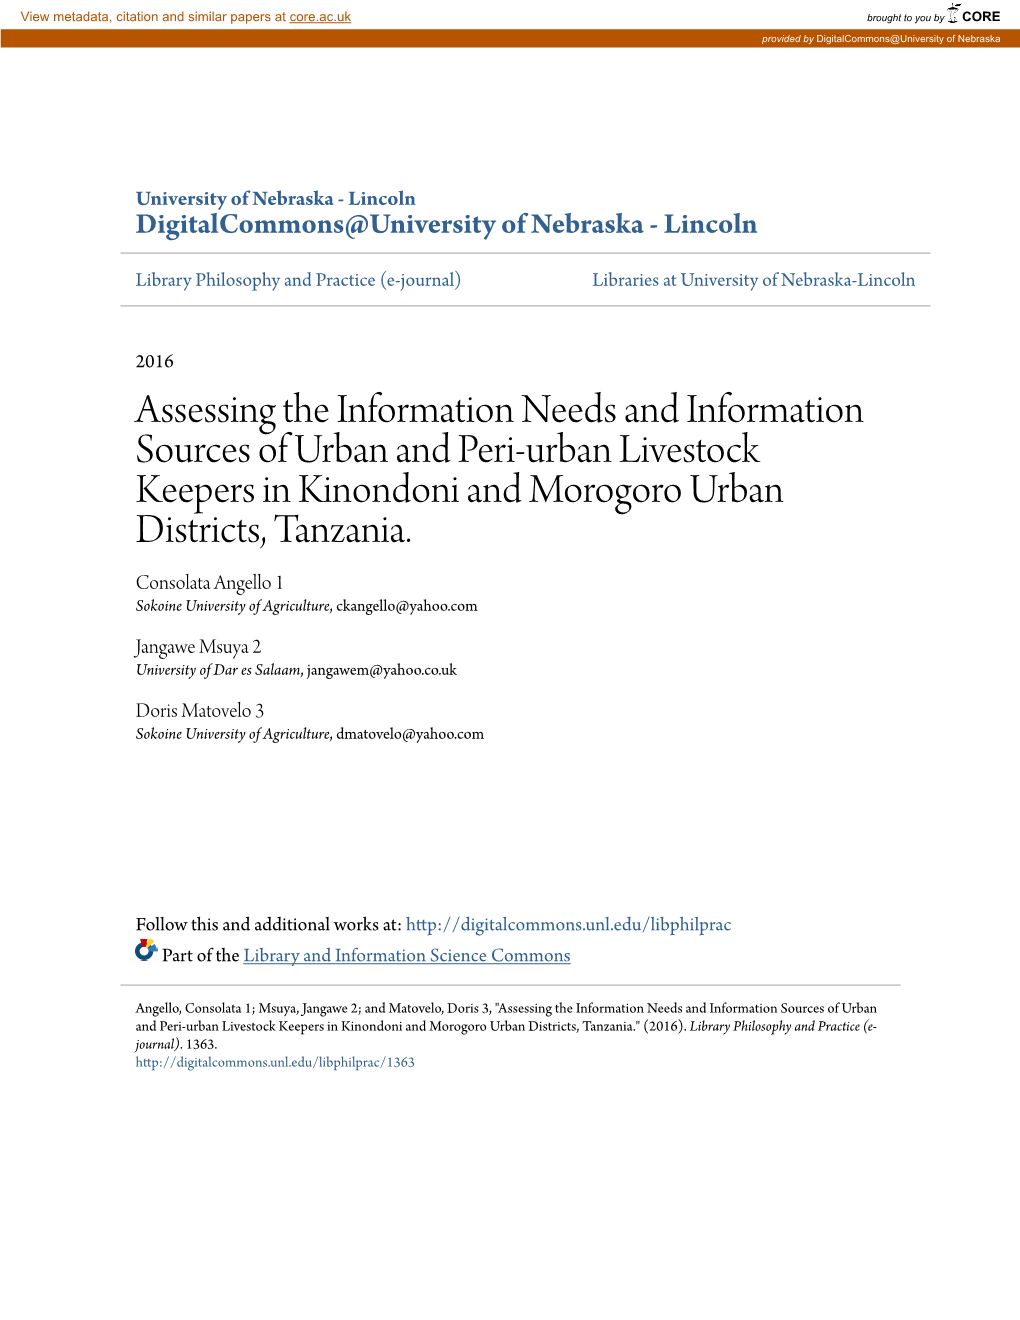 Assessing the Information Needs and Information Sources of Urban and Peri-Urban Livestock Keepers in Kinondoni and Morogoro Urban Districts, Tanzania